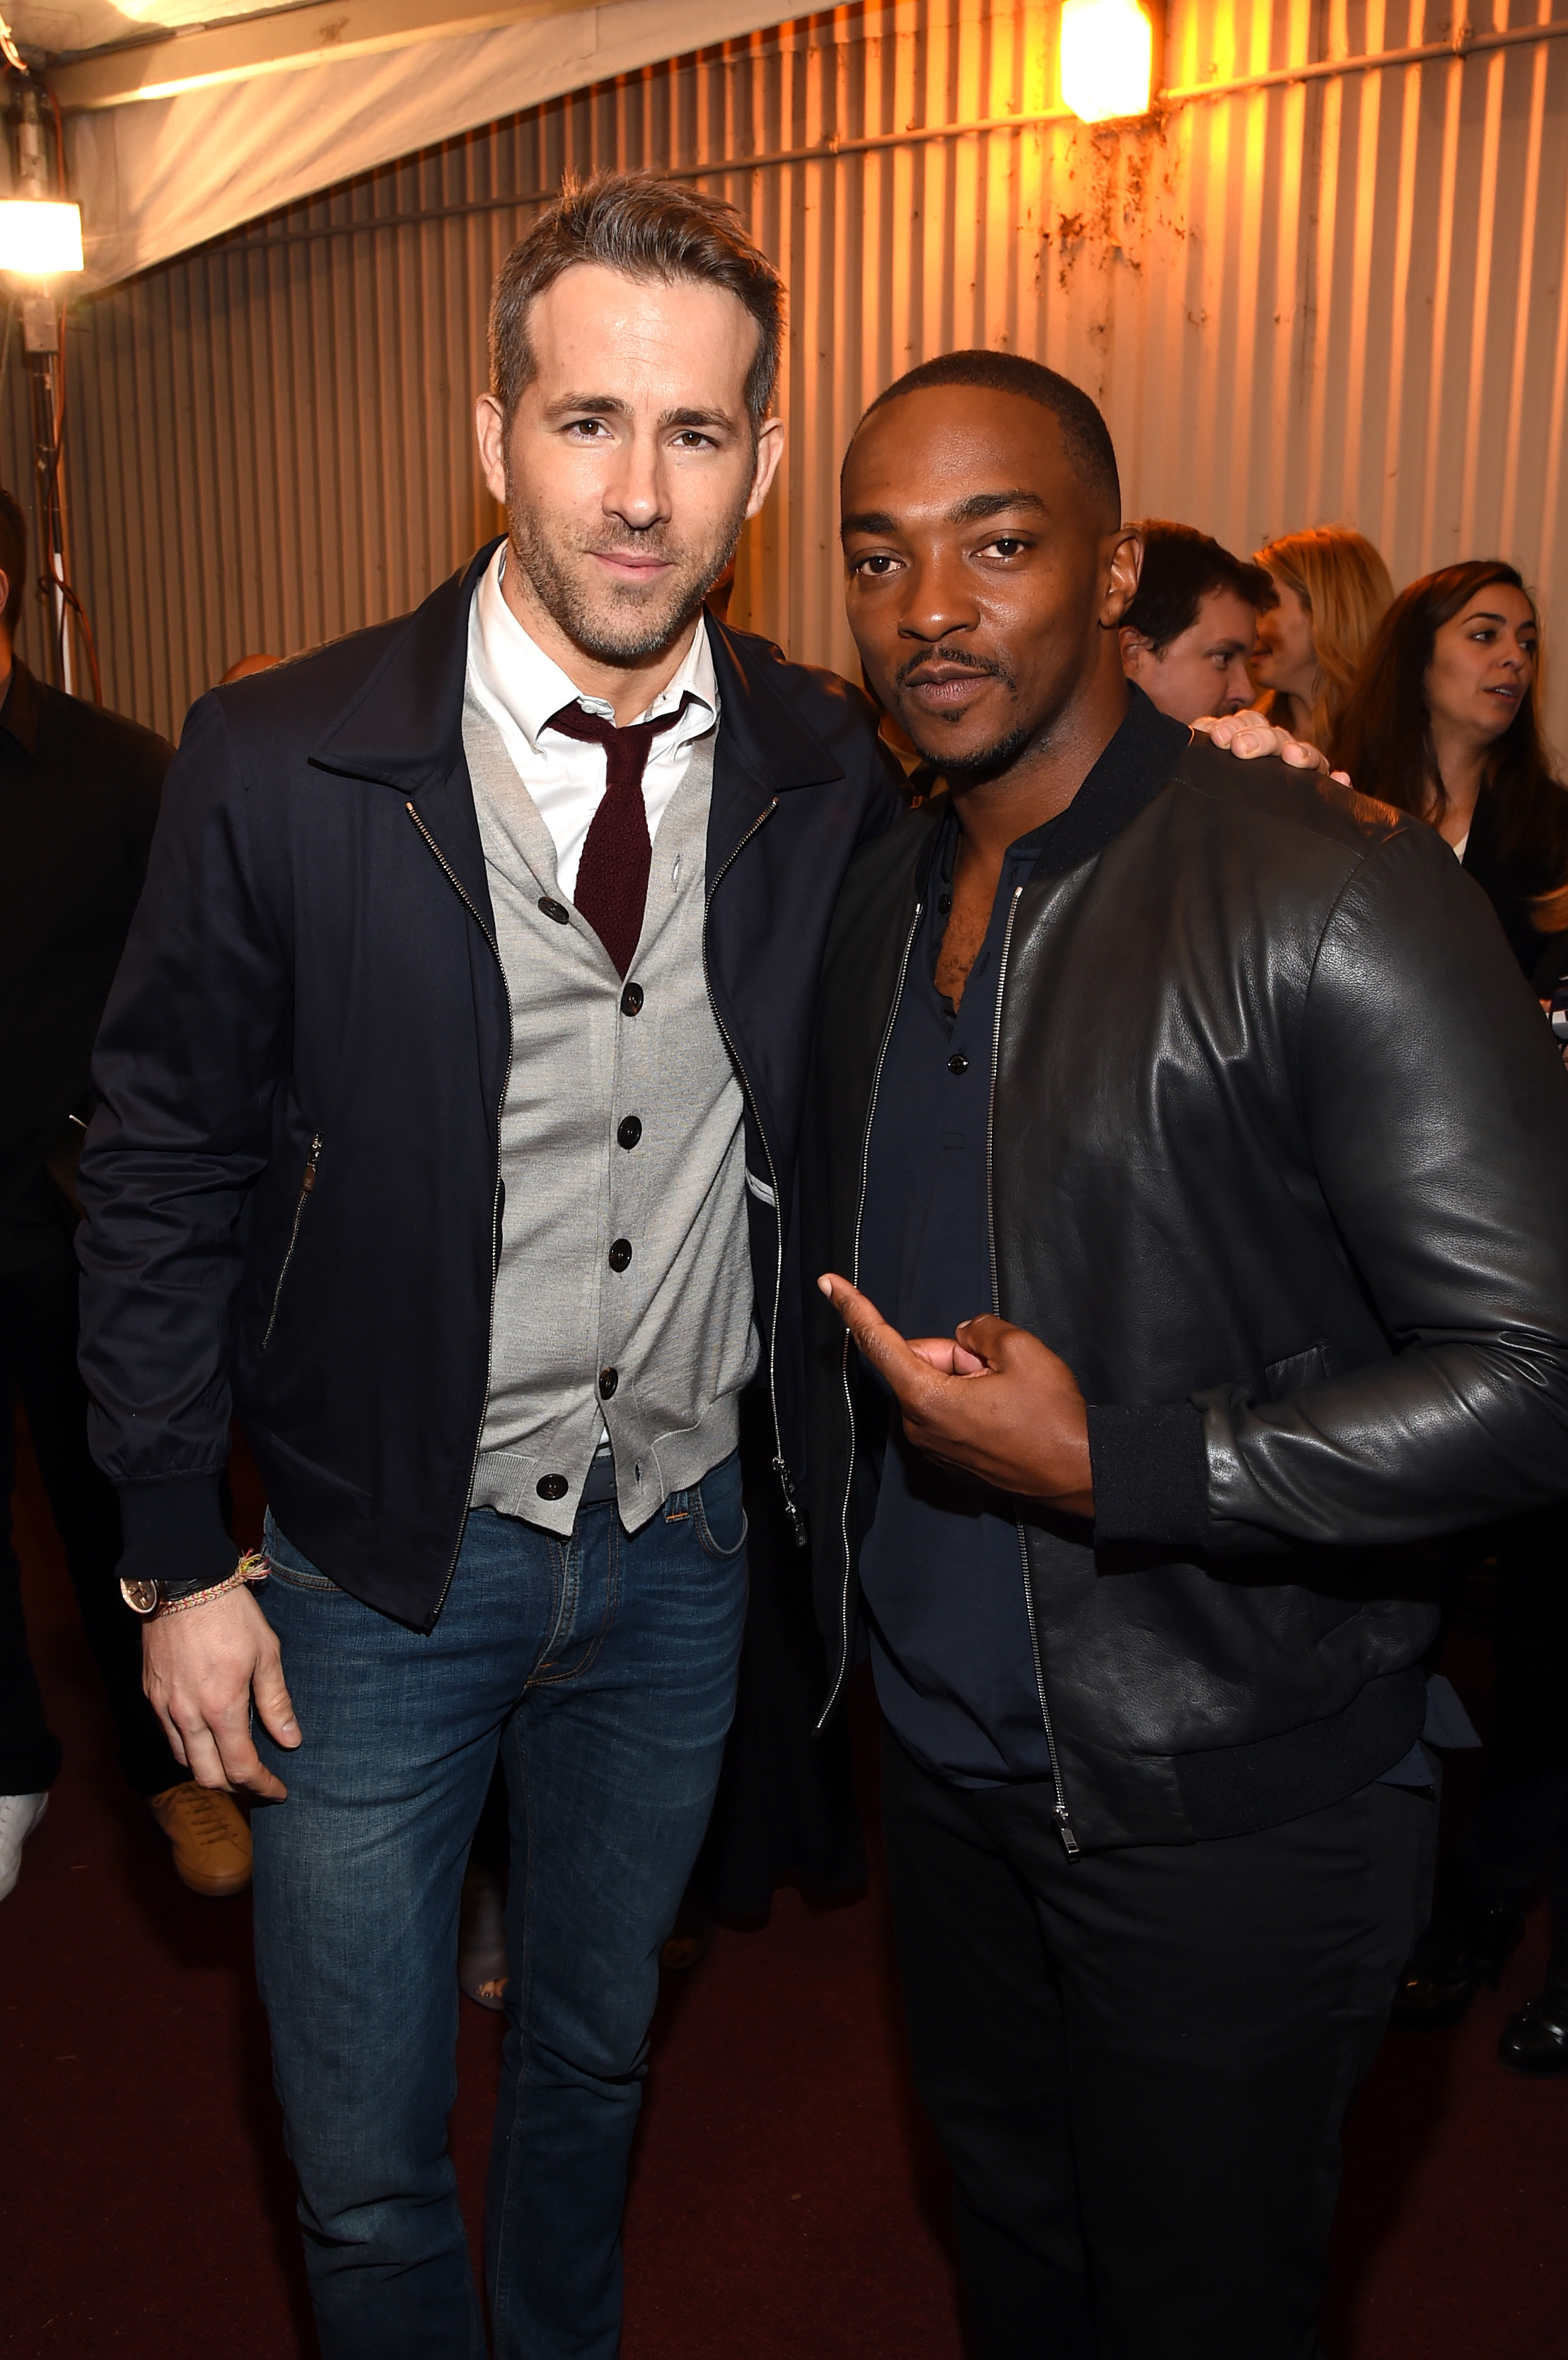 BURBANK, CALIFORNIA - APRIL 09:  (EXCLUSIVE ACCESS, SPECIAL RATES APPLY) Actors Ryan Reynolds (L) and Anthony Mackie attend the 2016 MTV Movie Awards at Warner Bros. Studios on April 9, 2016 in Burbank, California.  MTV Movie Awards airs April 10, 2016 at 8pm ET/PT.  (Photo by Larry Busacca/MTV1415/Getty Images for MTV)